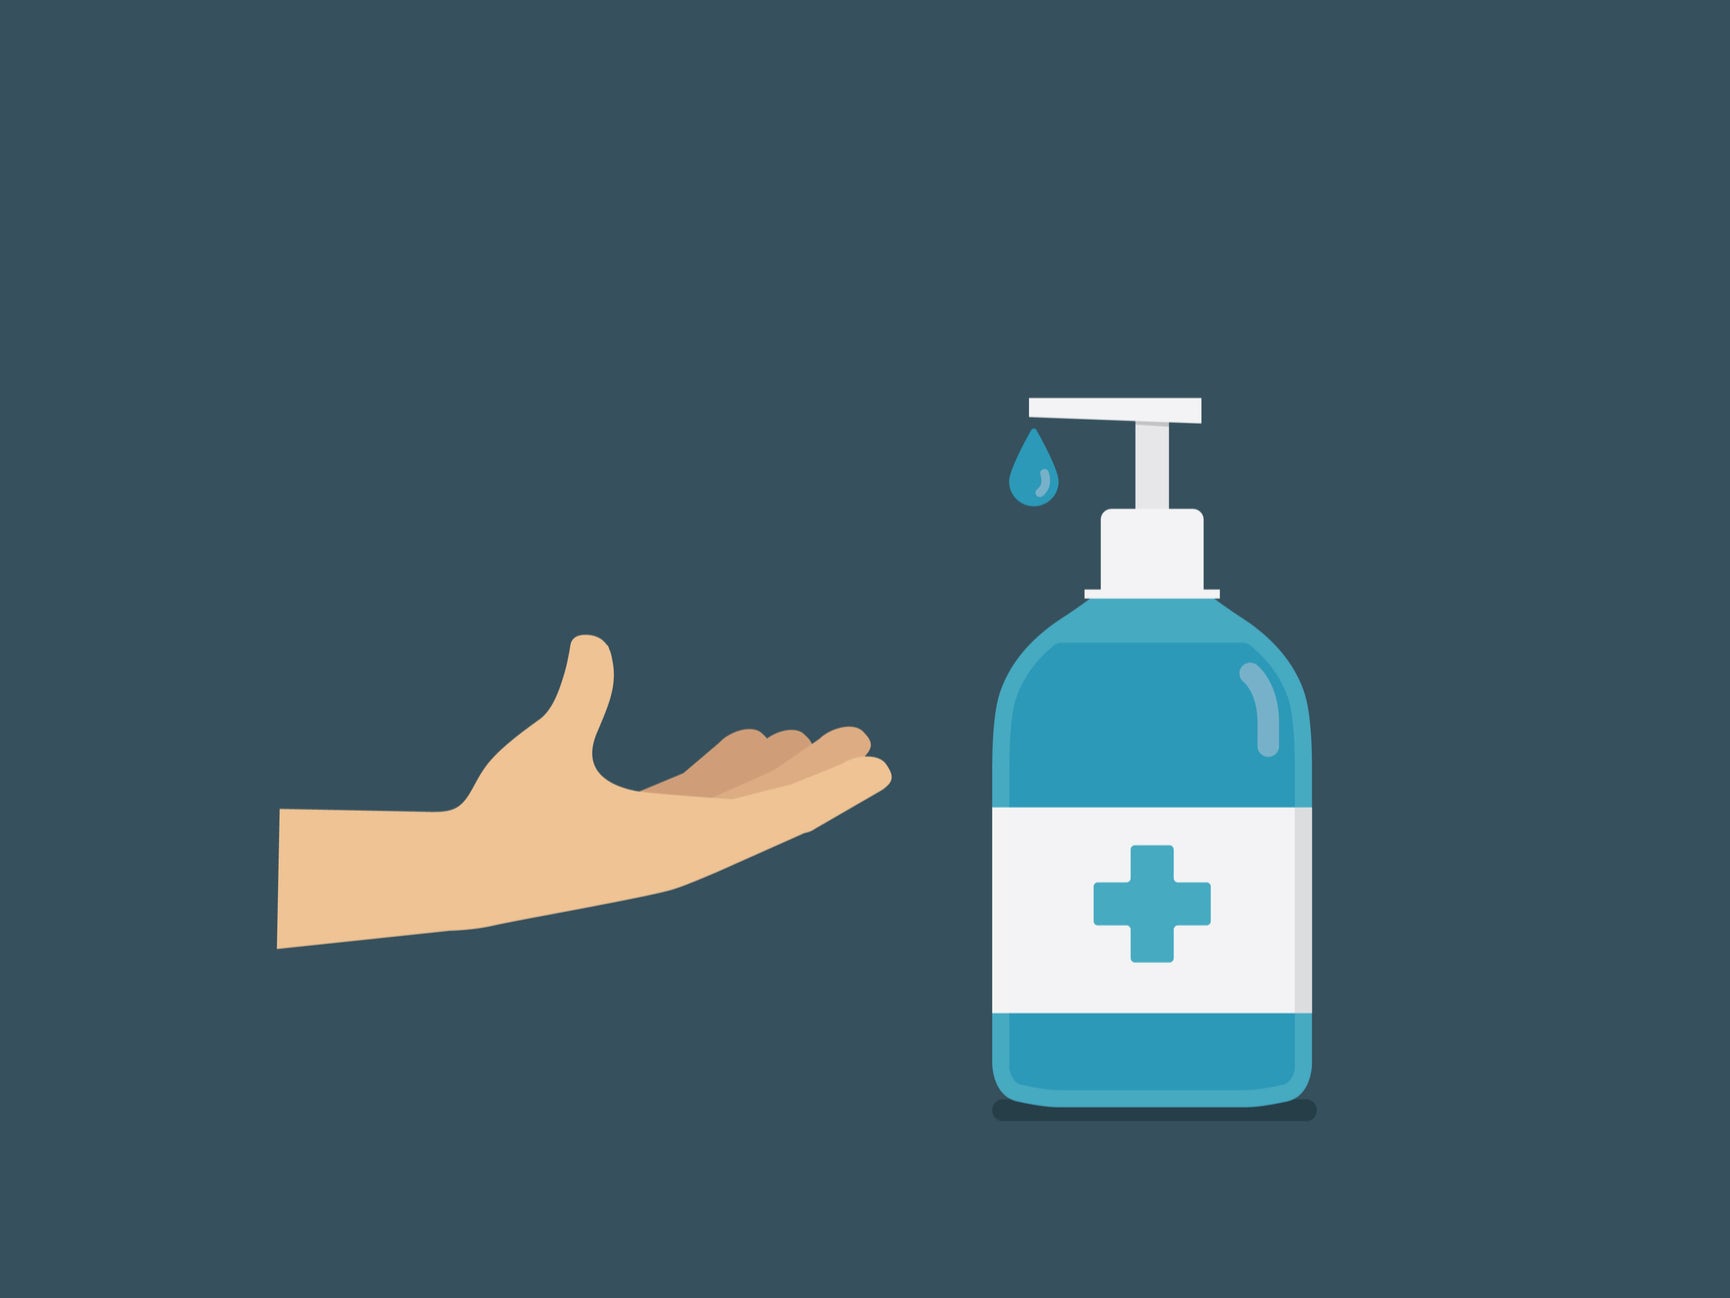 Is the repeated cleaning and sanitising of hands the best way to combat Covid-19?